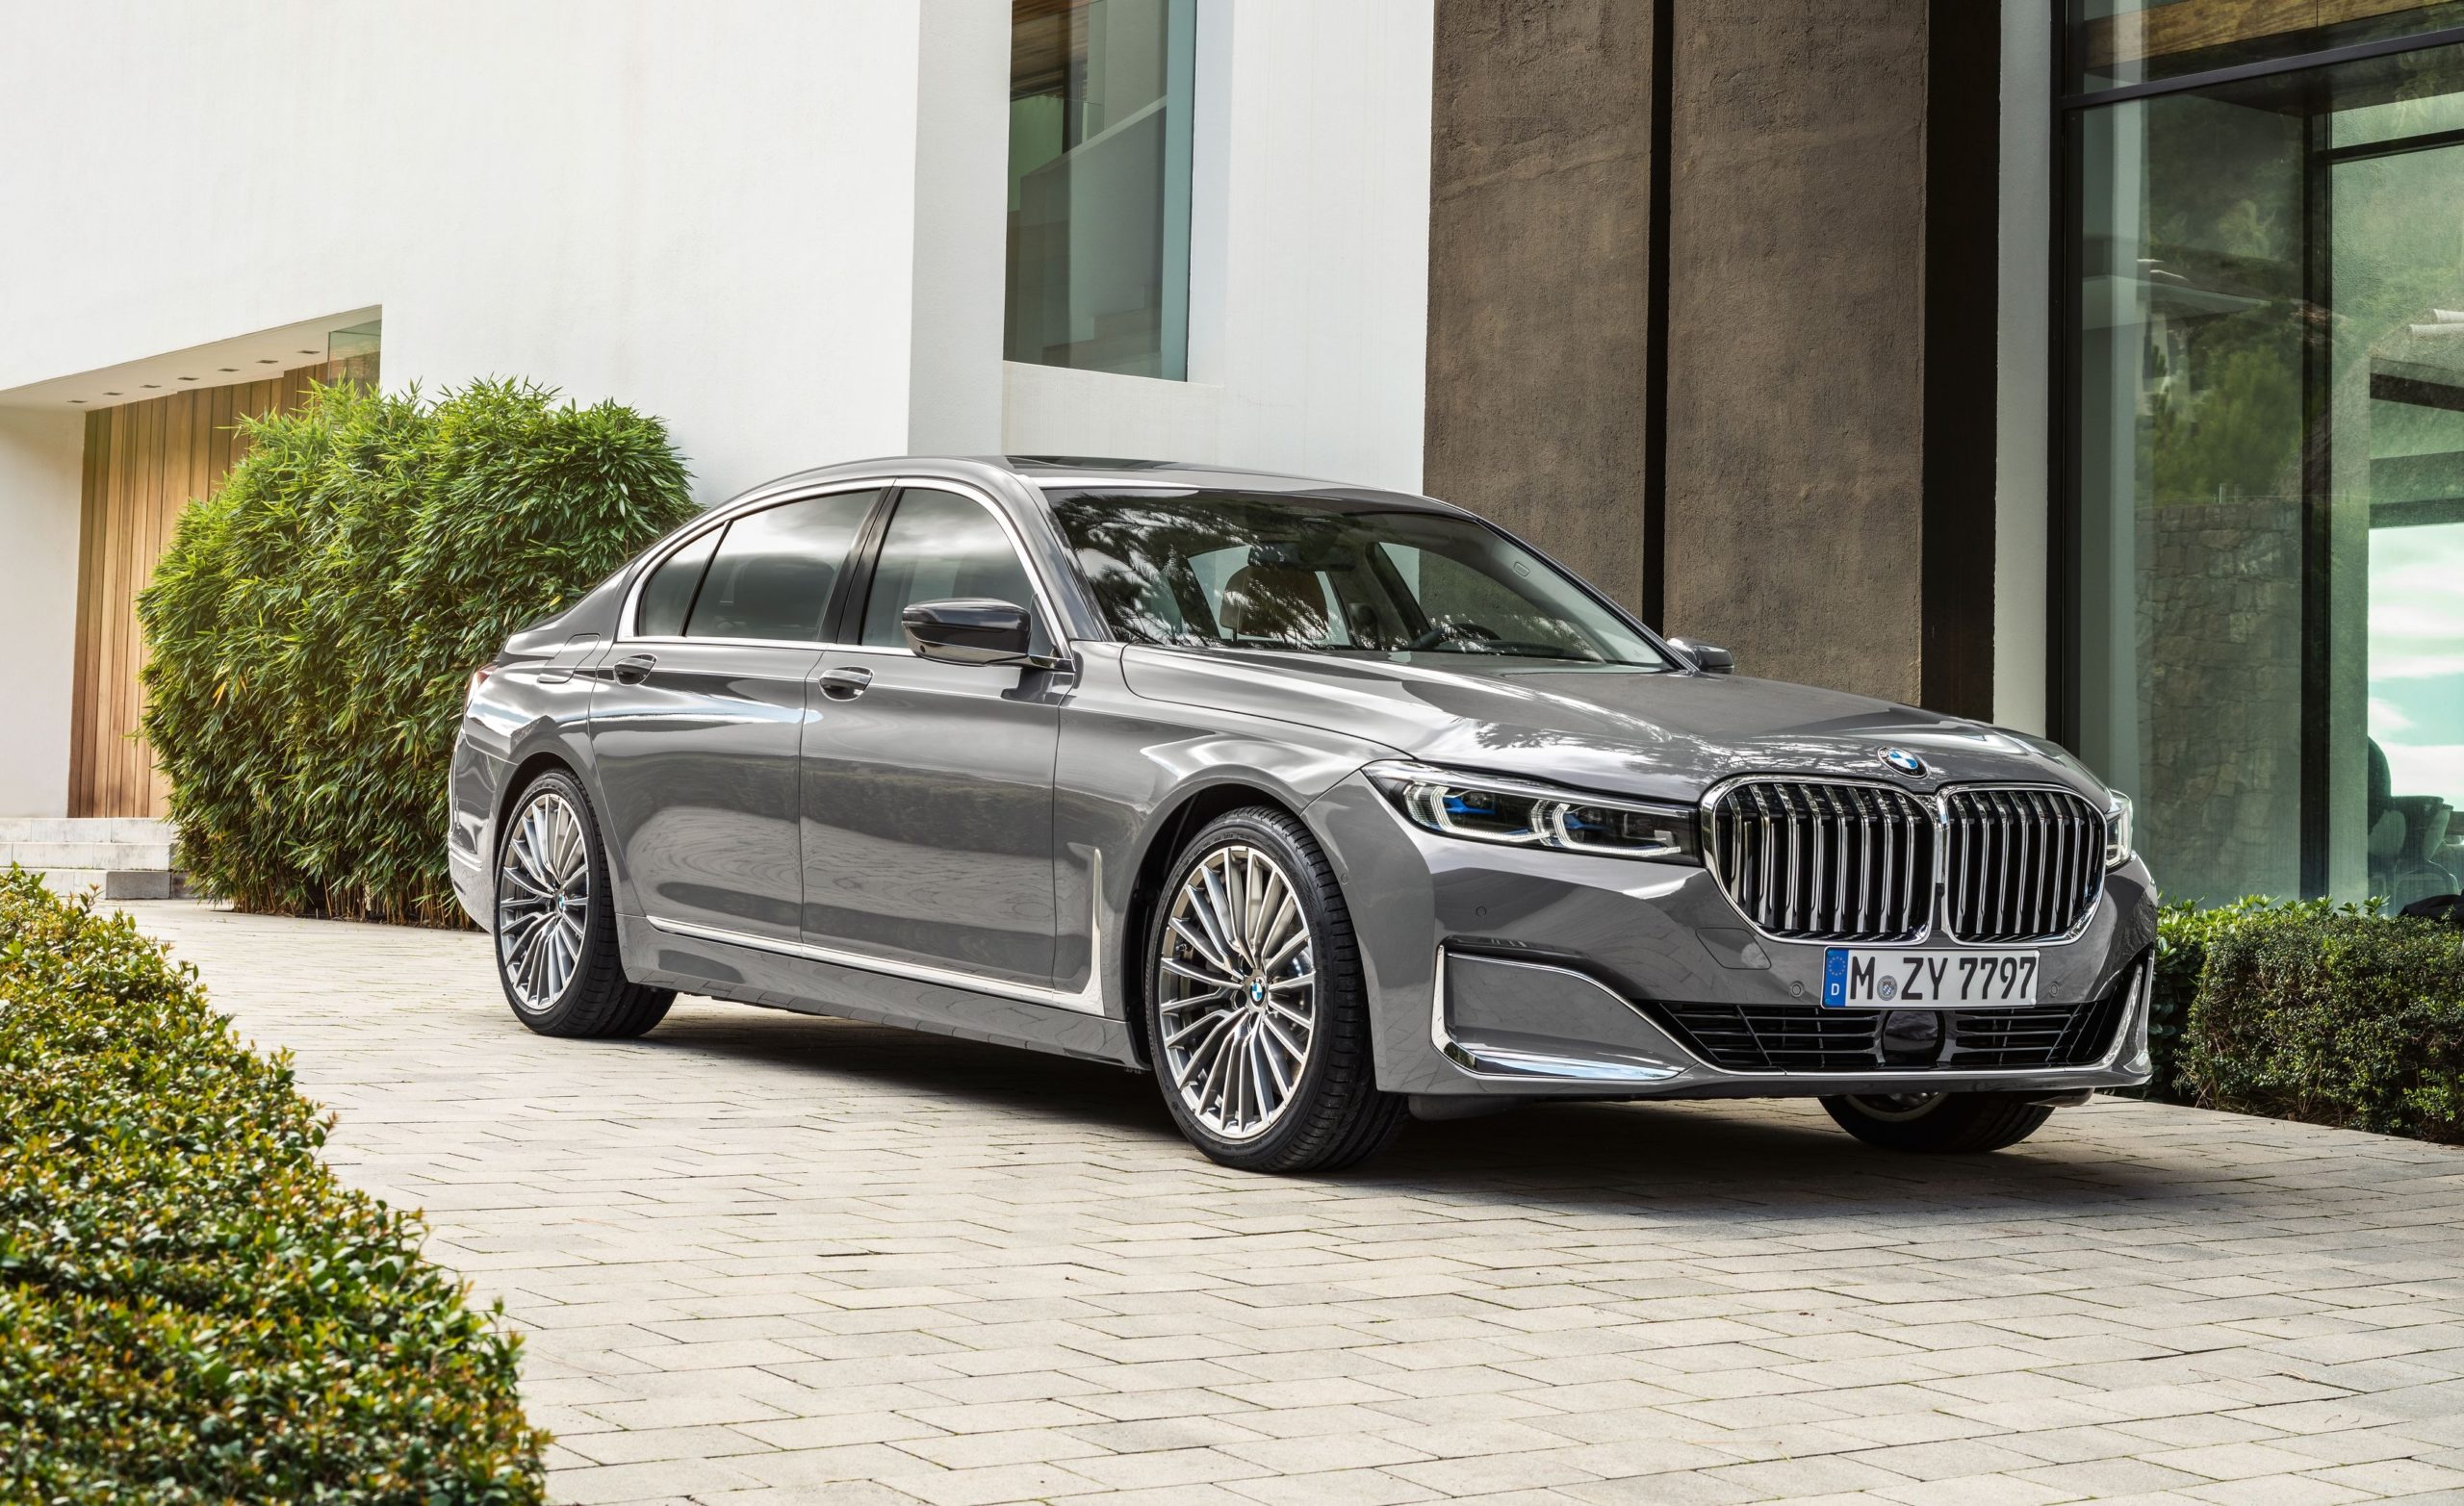 2021 BMW 7 Series Images